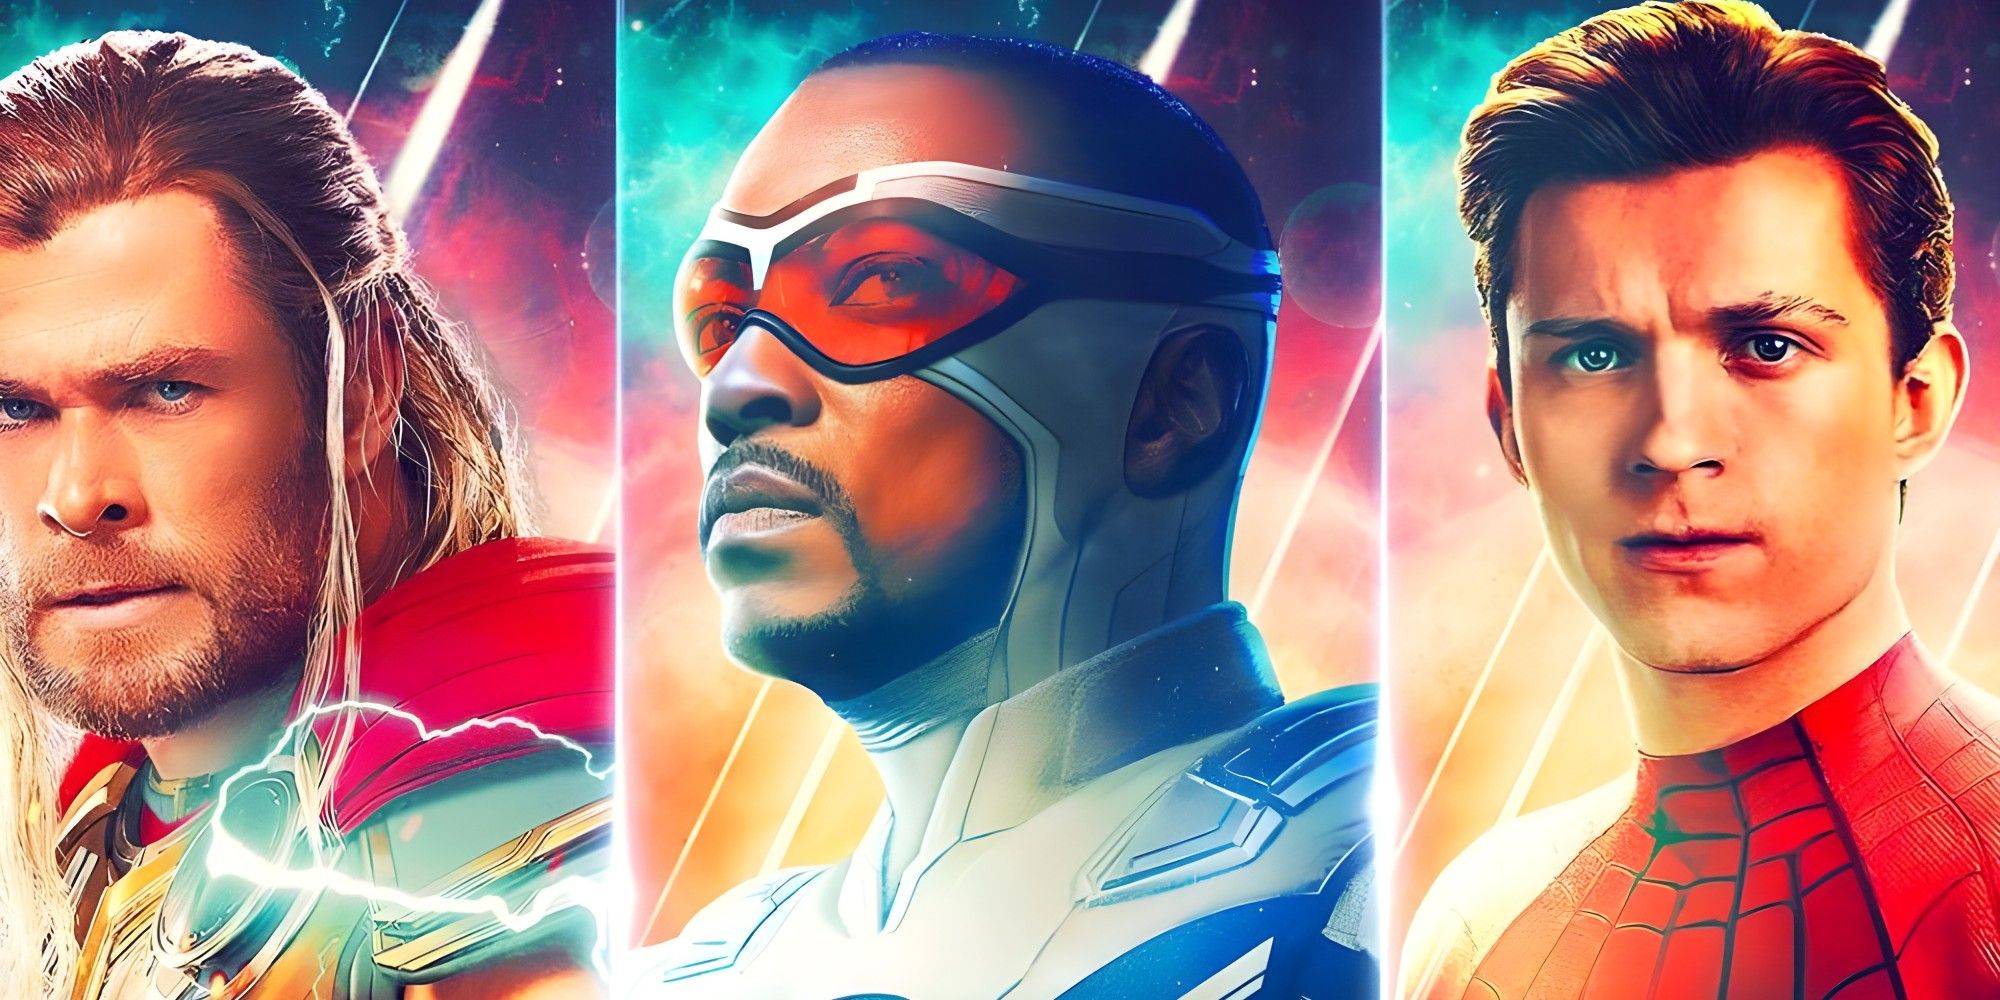 Avengers: The Kang Dynasty fan posters for Thor, Sam Wilson's Captain America, and Spider-Man.